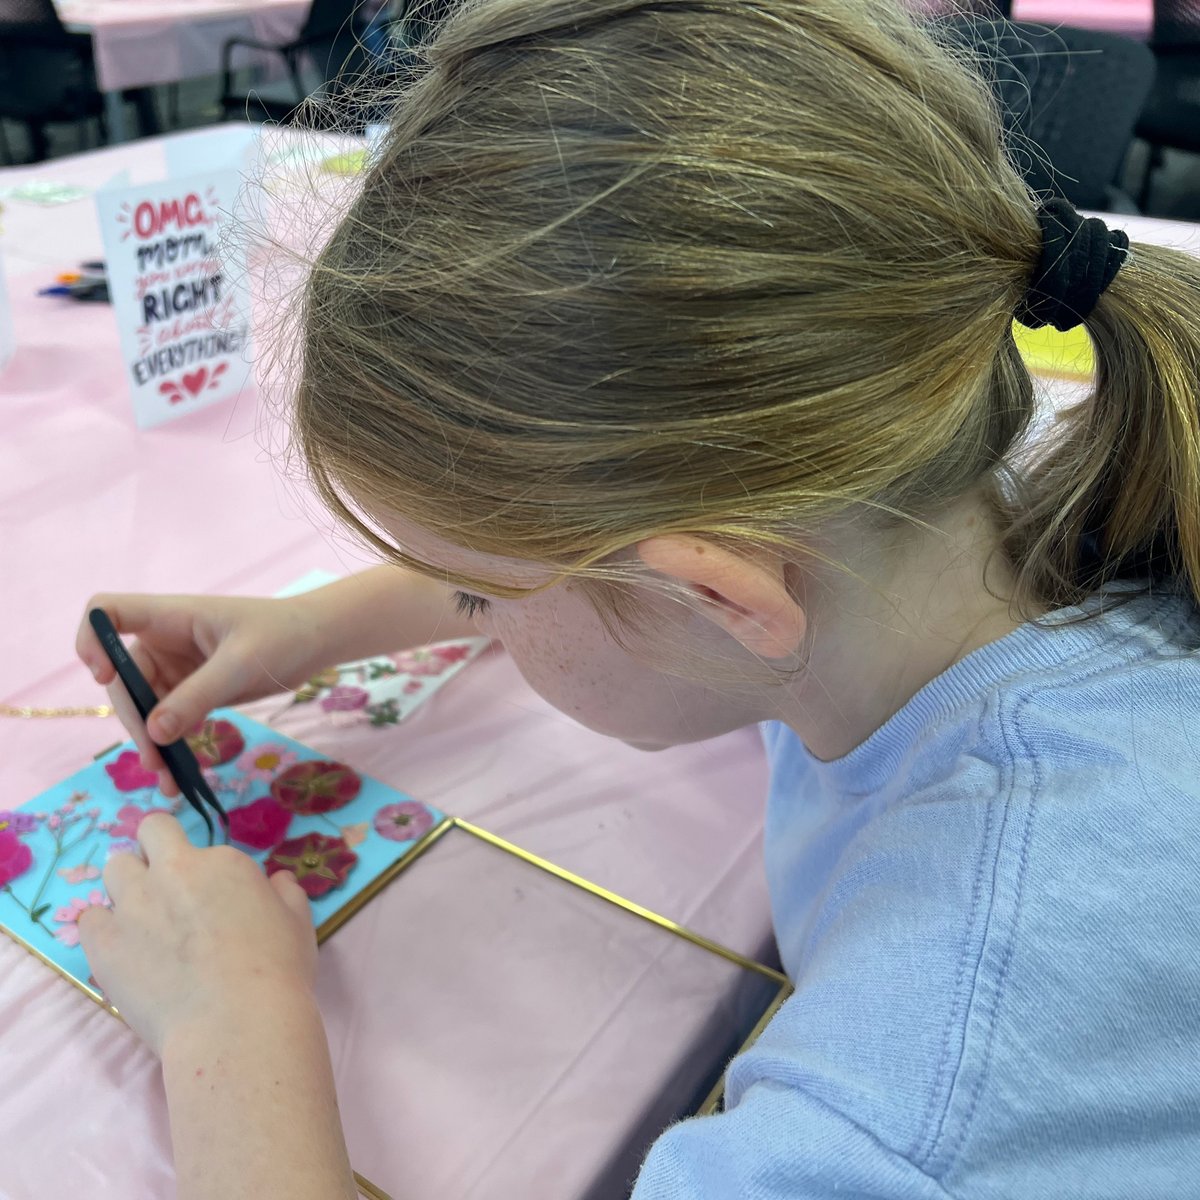 In honor of #MothersDay, the Wellness team at our South Carolina manufacturing campus hosted a Mother’s Day Brunch and Bash, which included Mom & Me yoga, crafts and games. Happy Mother’s Day to all the incredible moms of #Arthrex and beyond.